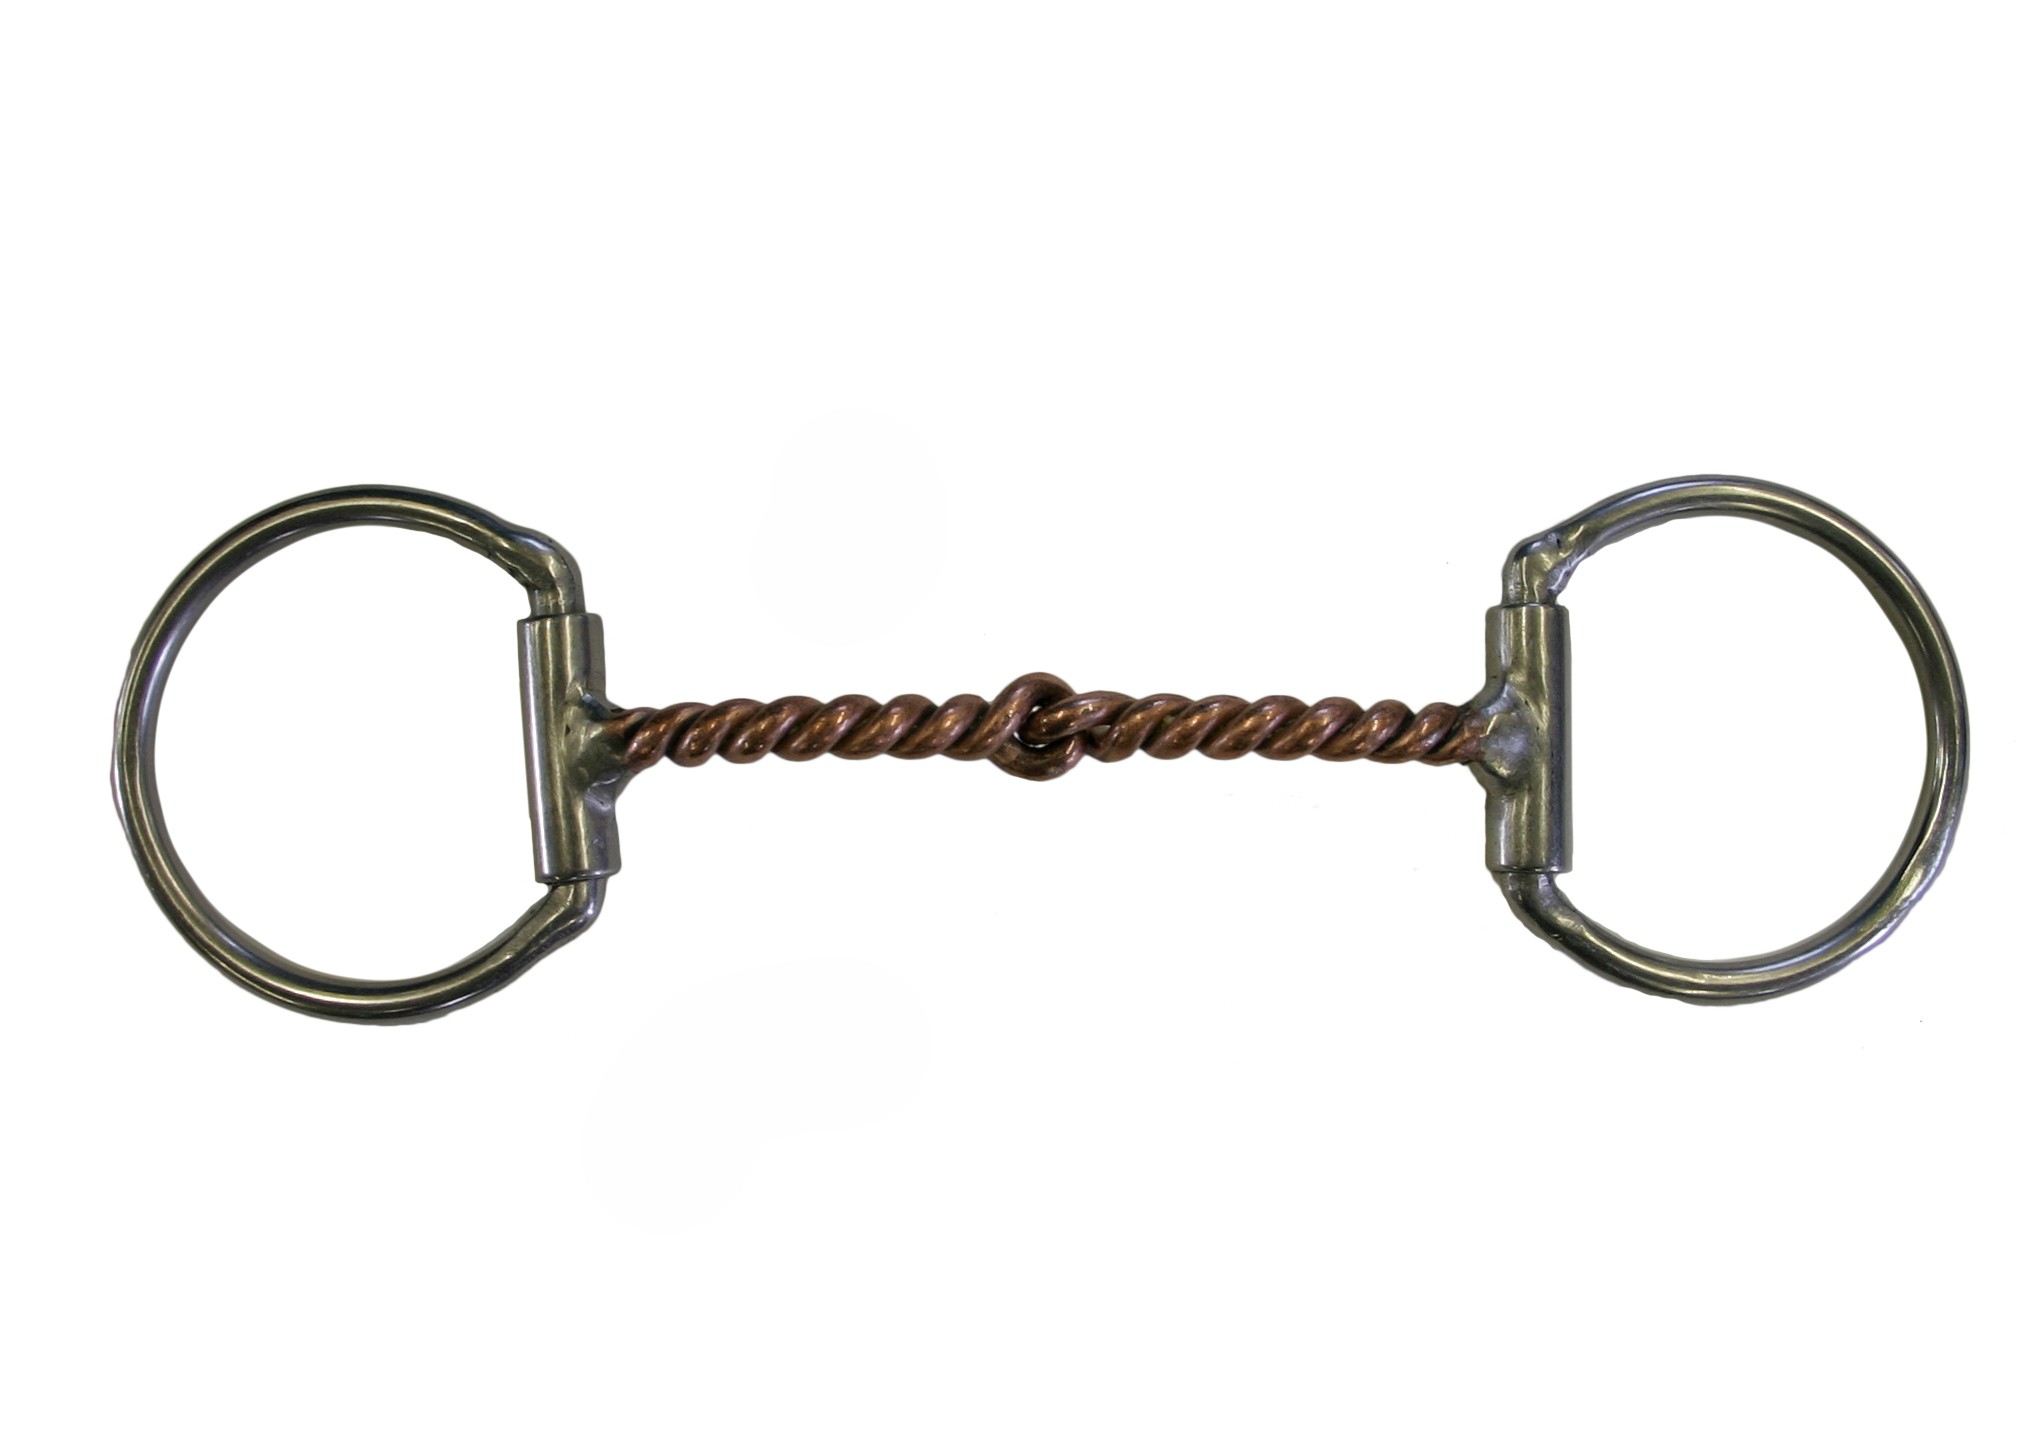 3/8" Brass Twisted Wire Snaffle